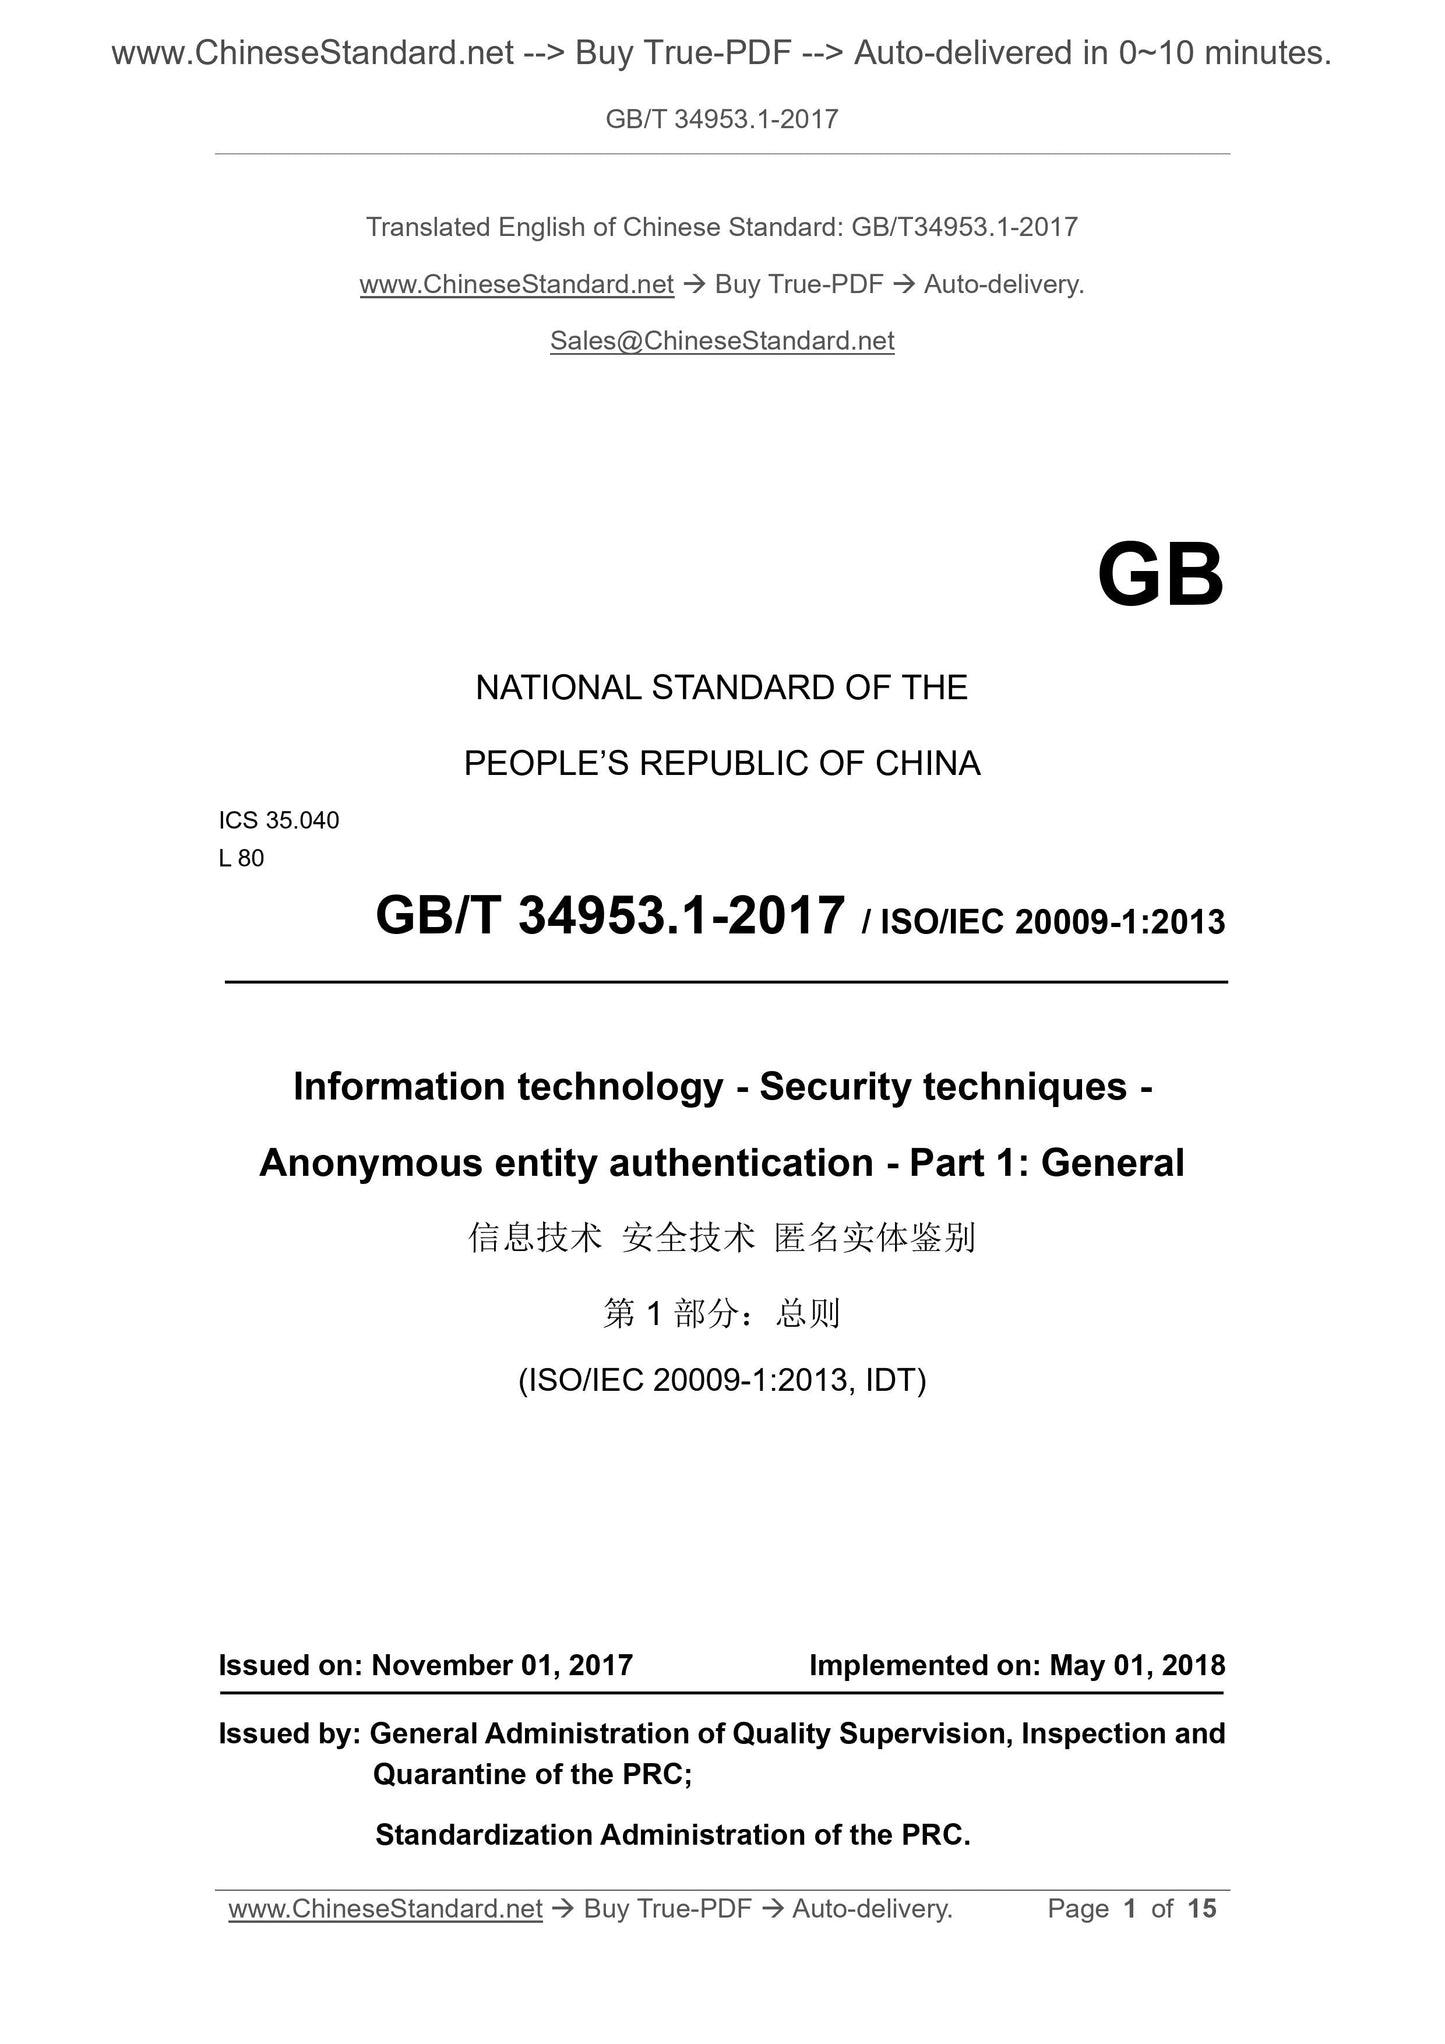 GB/T 34953.1-2017 Page 1